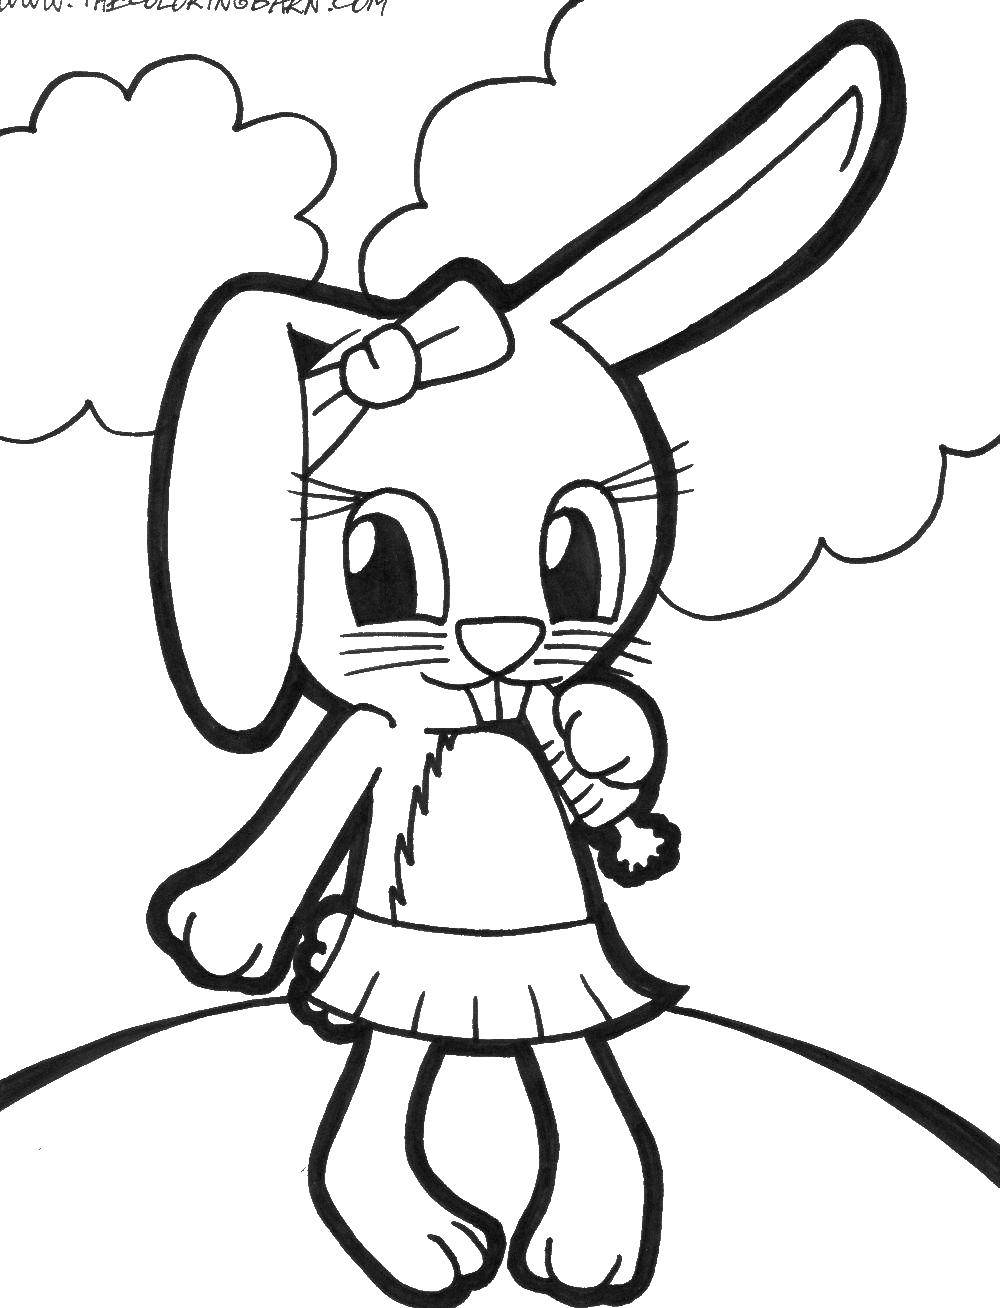 Coloring Rabbit with a bow and a carrot. Category the rabbit. Tags:  rabbit, hare.